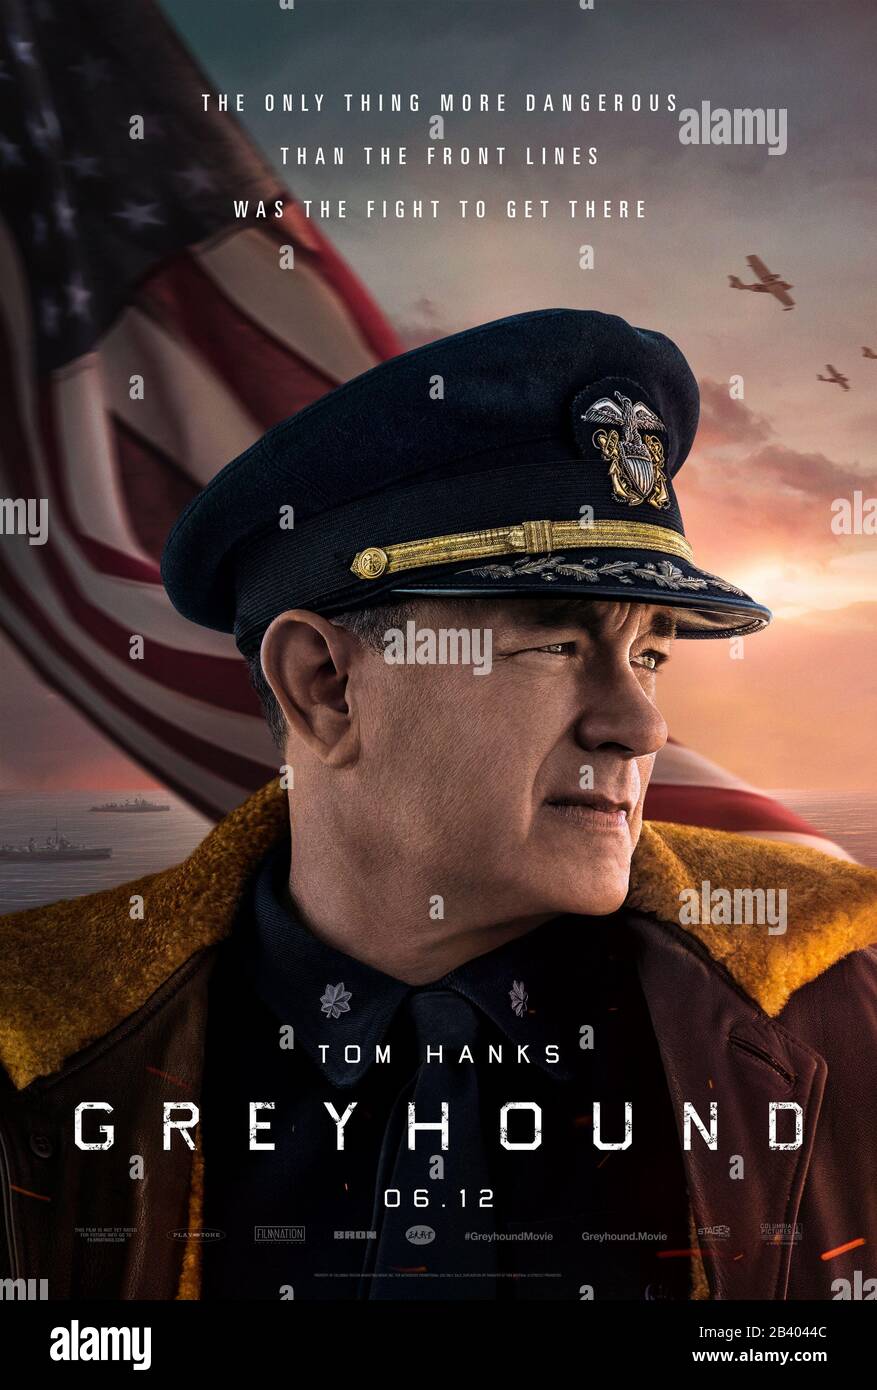 RELEASE DATE: June 12, 2020 TITLE: Greyhound STUDIO: Sony Pictures DIRECTOR: Aaron Schneider PLOT: During World War II, a US Navy skipper must lead an Allied convoy being stalked by Nazi U-boat wolf packs. STARRING: TOM HANKS as Commander Ernest Krause poster art. (Credit Image: © Sony Pictures/Entertainment Pictures) Stock Photo